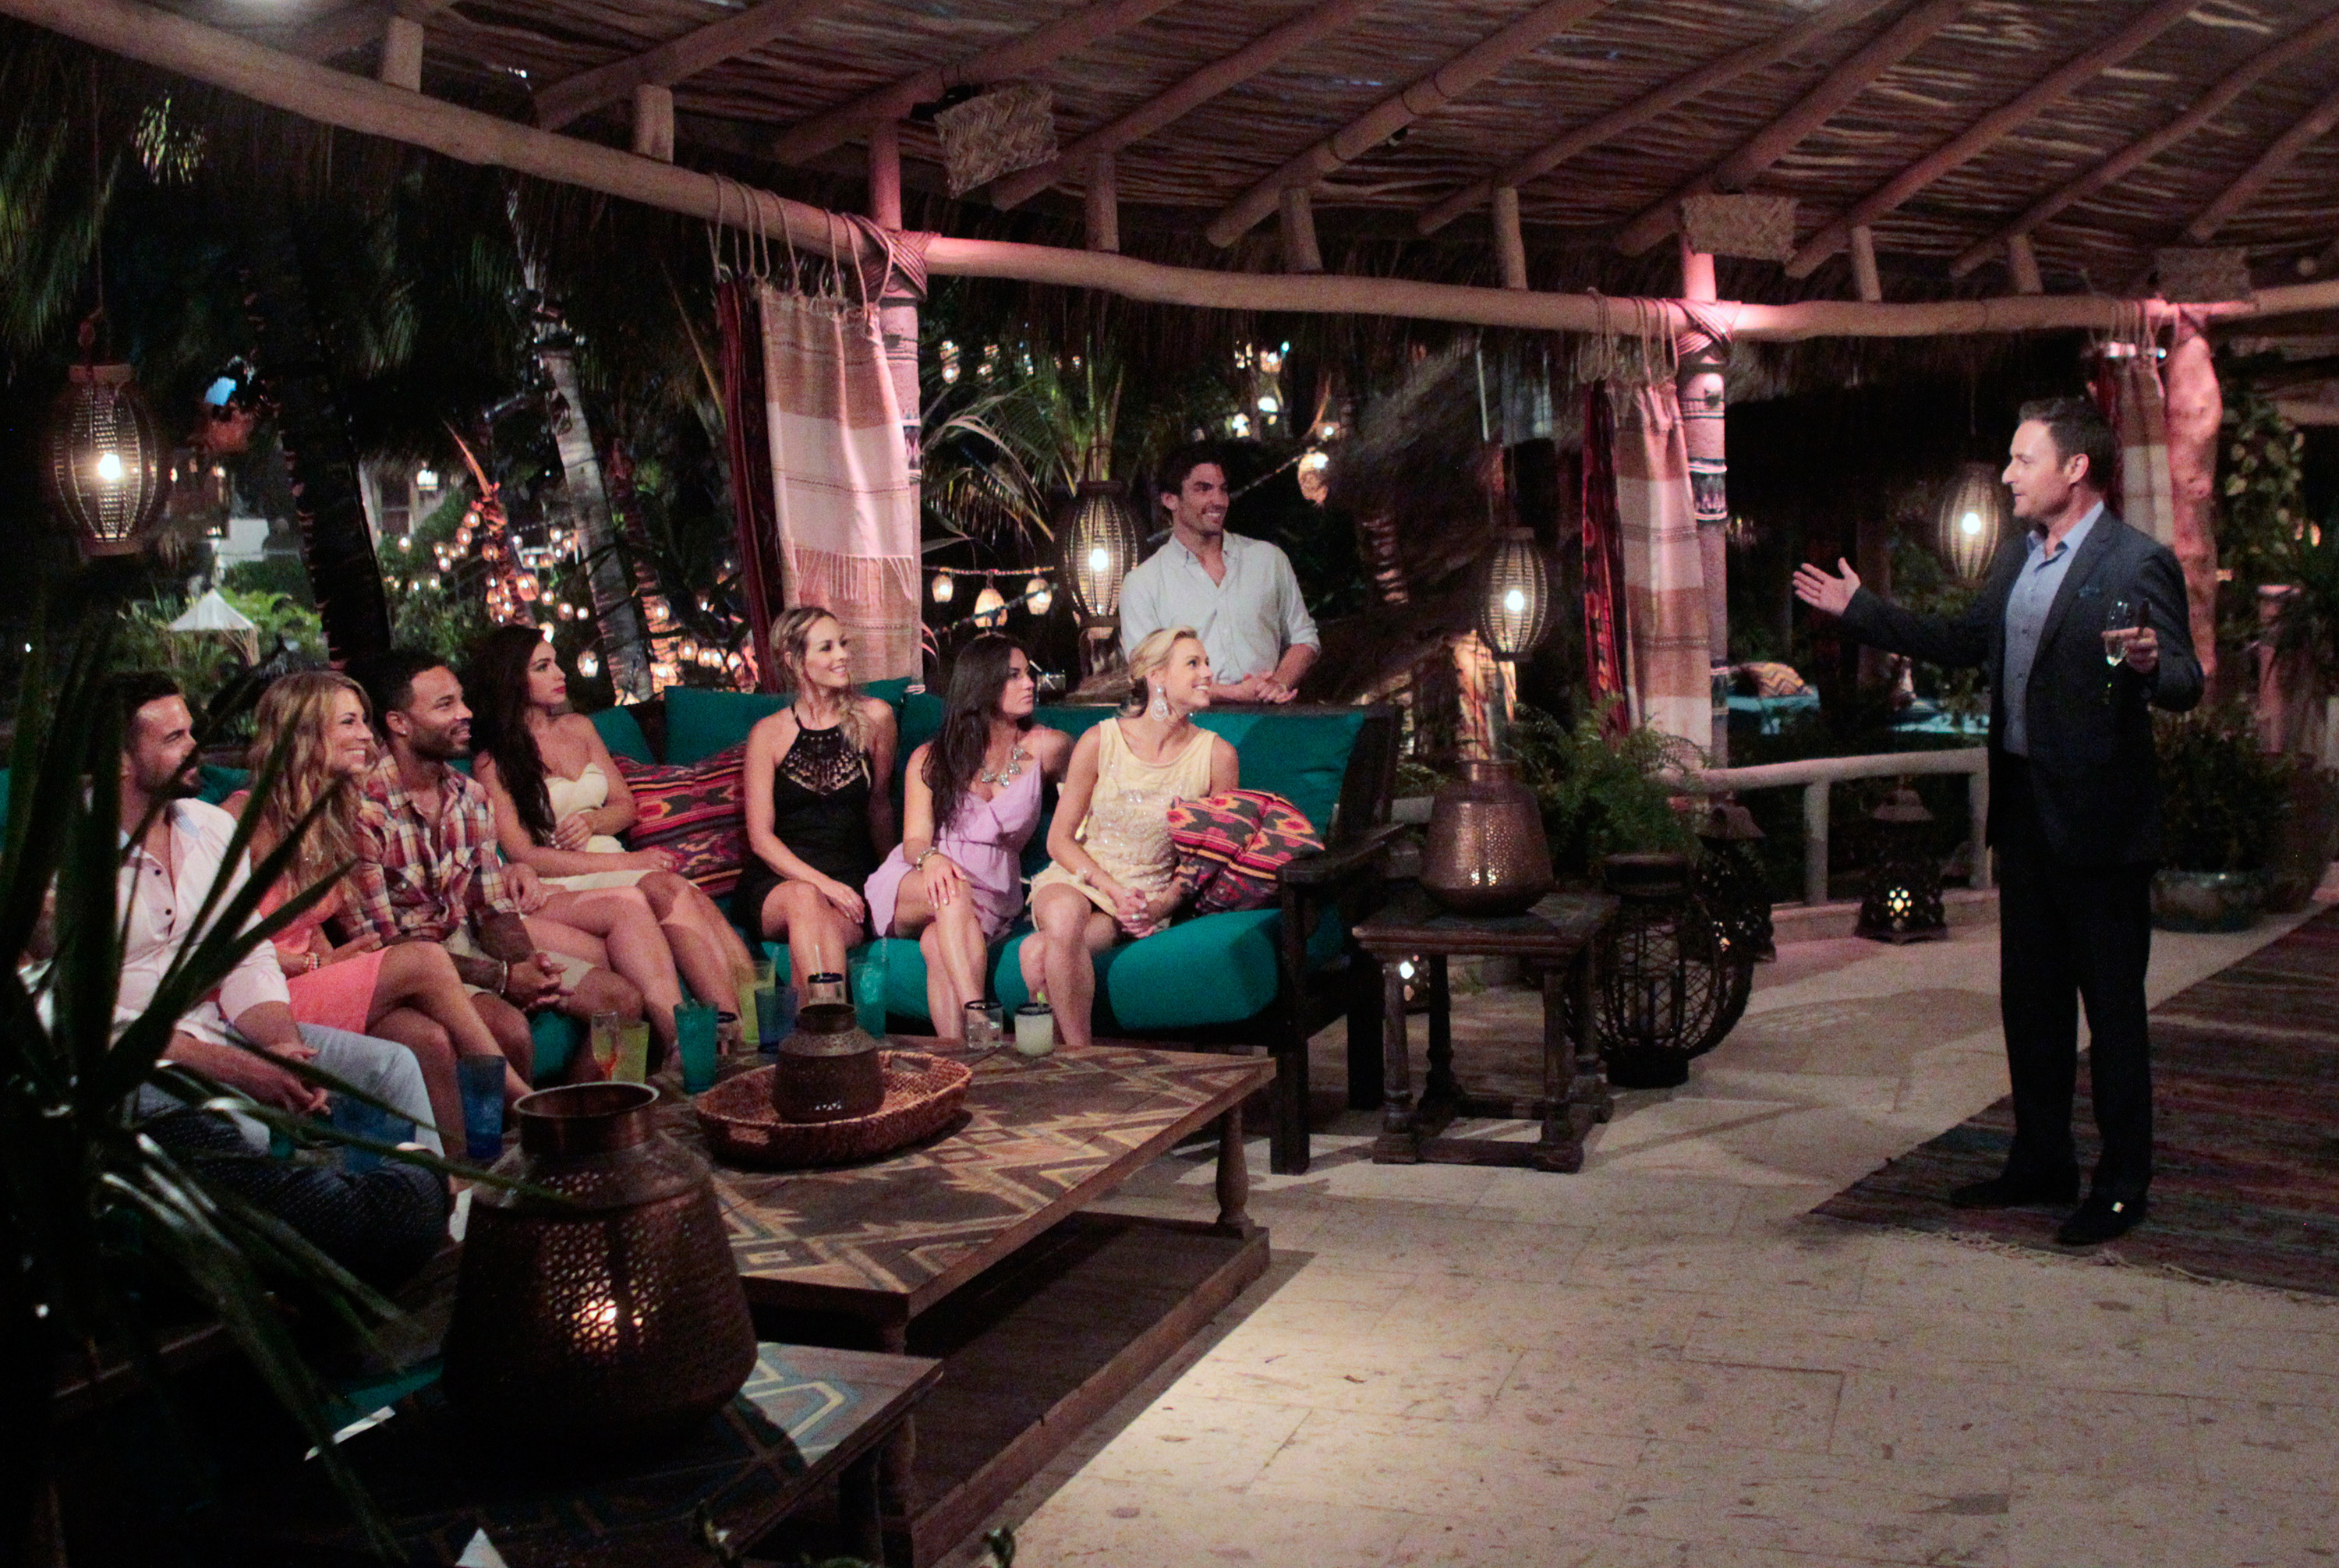 Group of people seated in a cozy outdoor lounge setting with a standing man addressing them